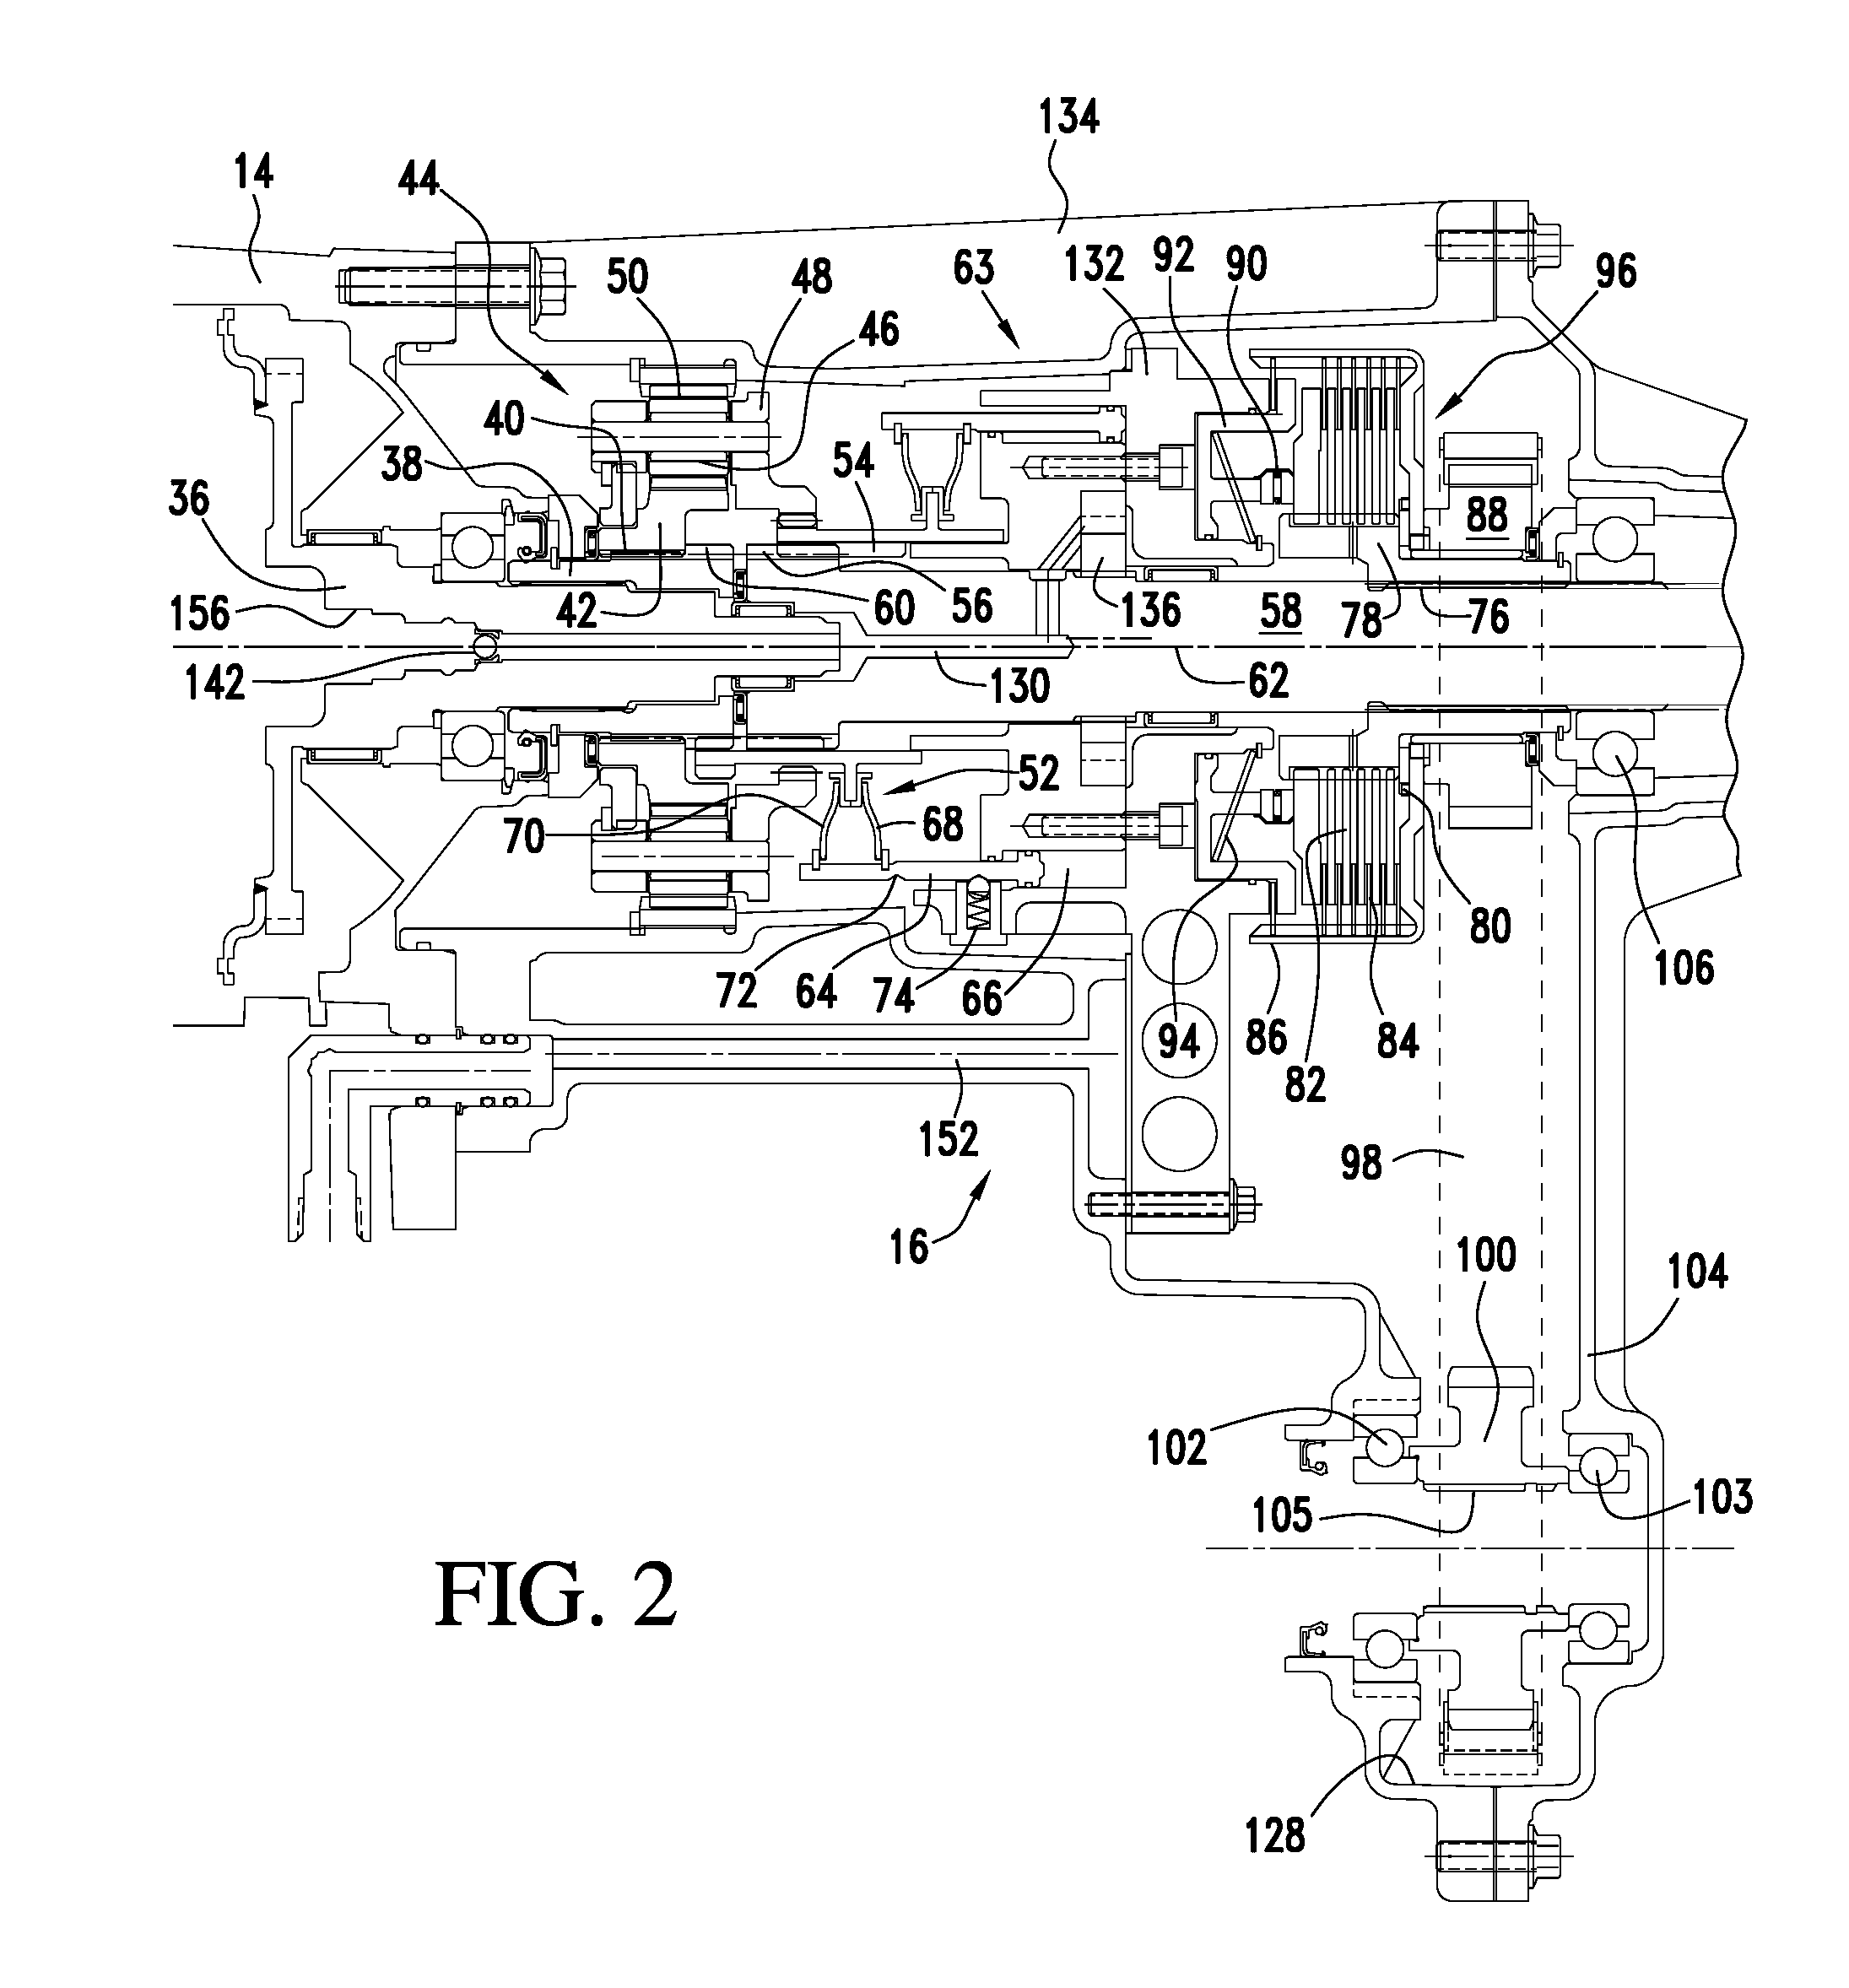 Transfer Case for a Motor Vehicle Powertrain